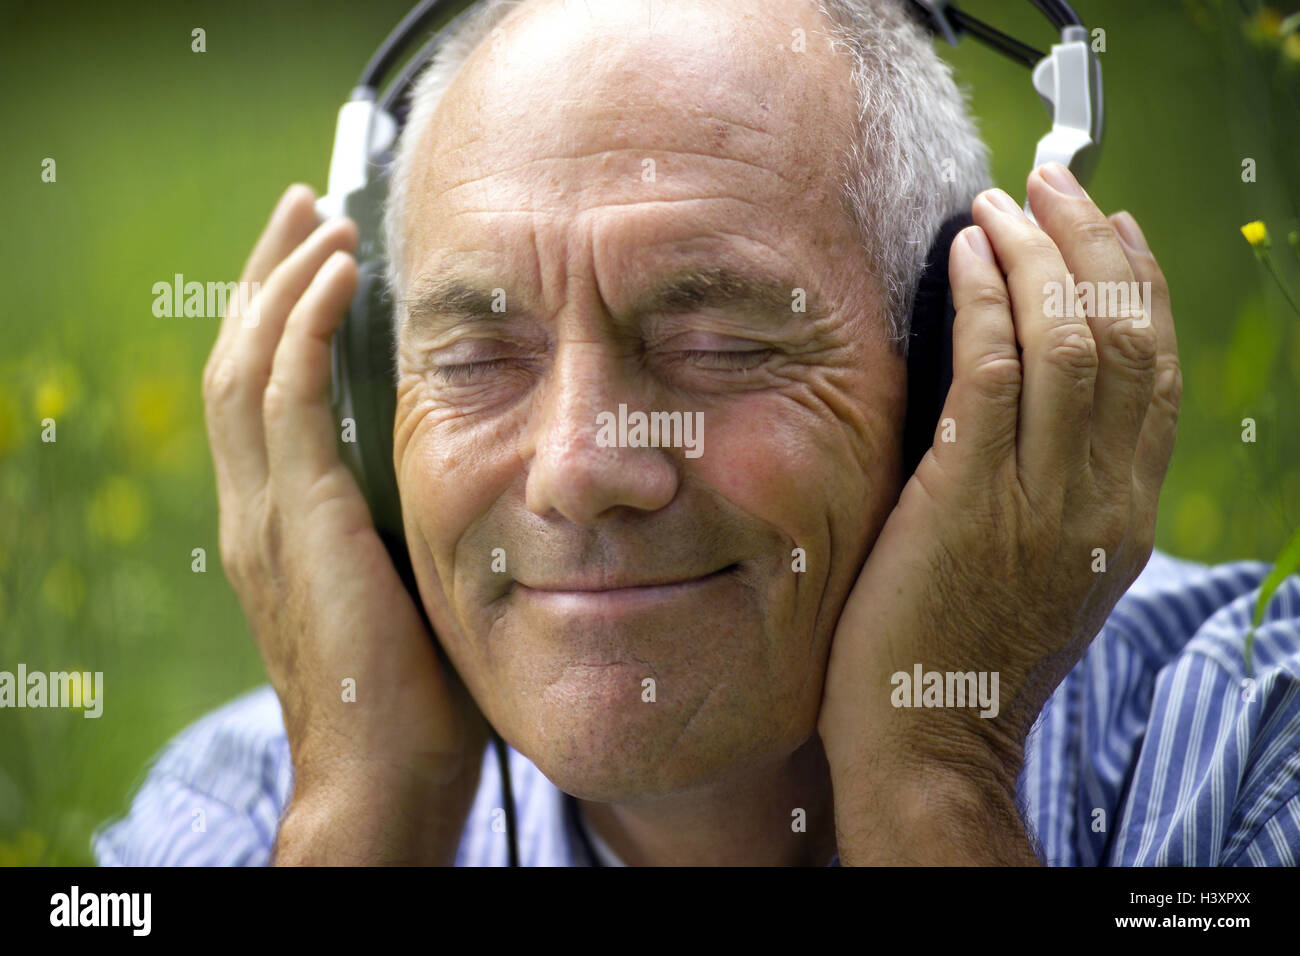 Senior, eyes closed, earphone, music hear, enjoy, portrait, outside, man, senior citizens, old person, pensioner, retirement, 60-70 years, time, time out, leisure time, Best Age, hobby, music, music hearing, recreation, is relaxing, smile, consumption, expression, happy, carefree, lighthearted, satisfaction, take it easy, music lover, attitude to life, old age pension, lifestyle, meadow, summer, nature, man's portrait, Ti3 Stock Photo